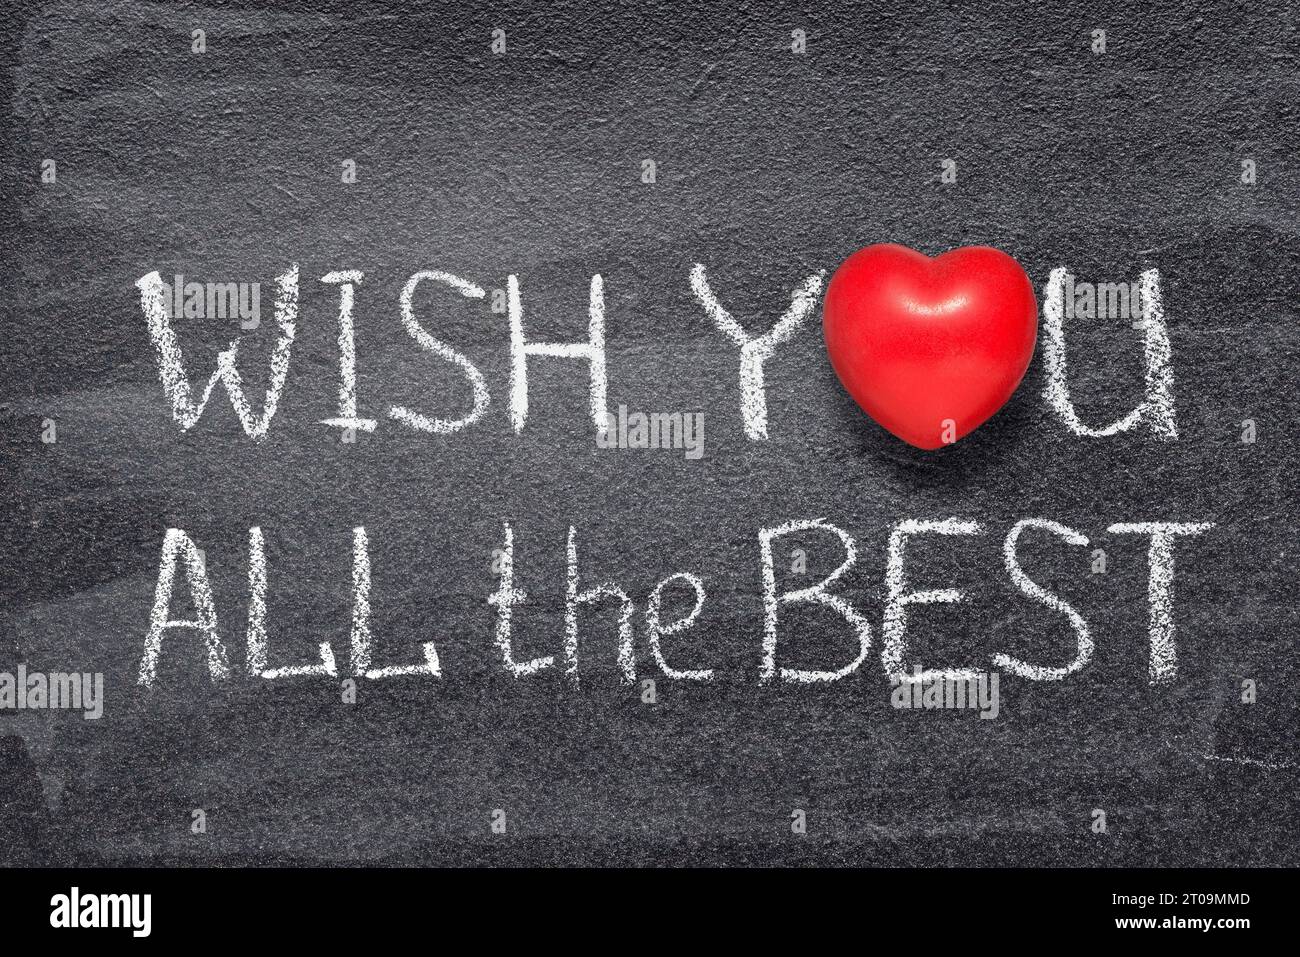 wish you all the best phrase written on chalkboard with red heart symbol Stock Photo